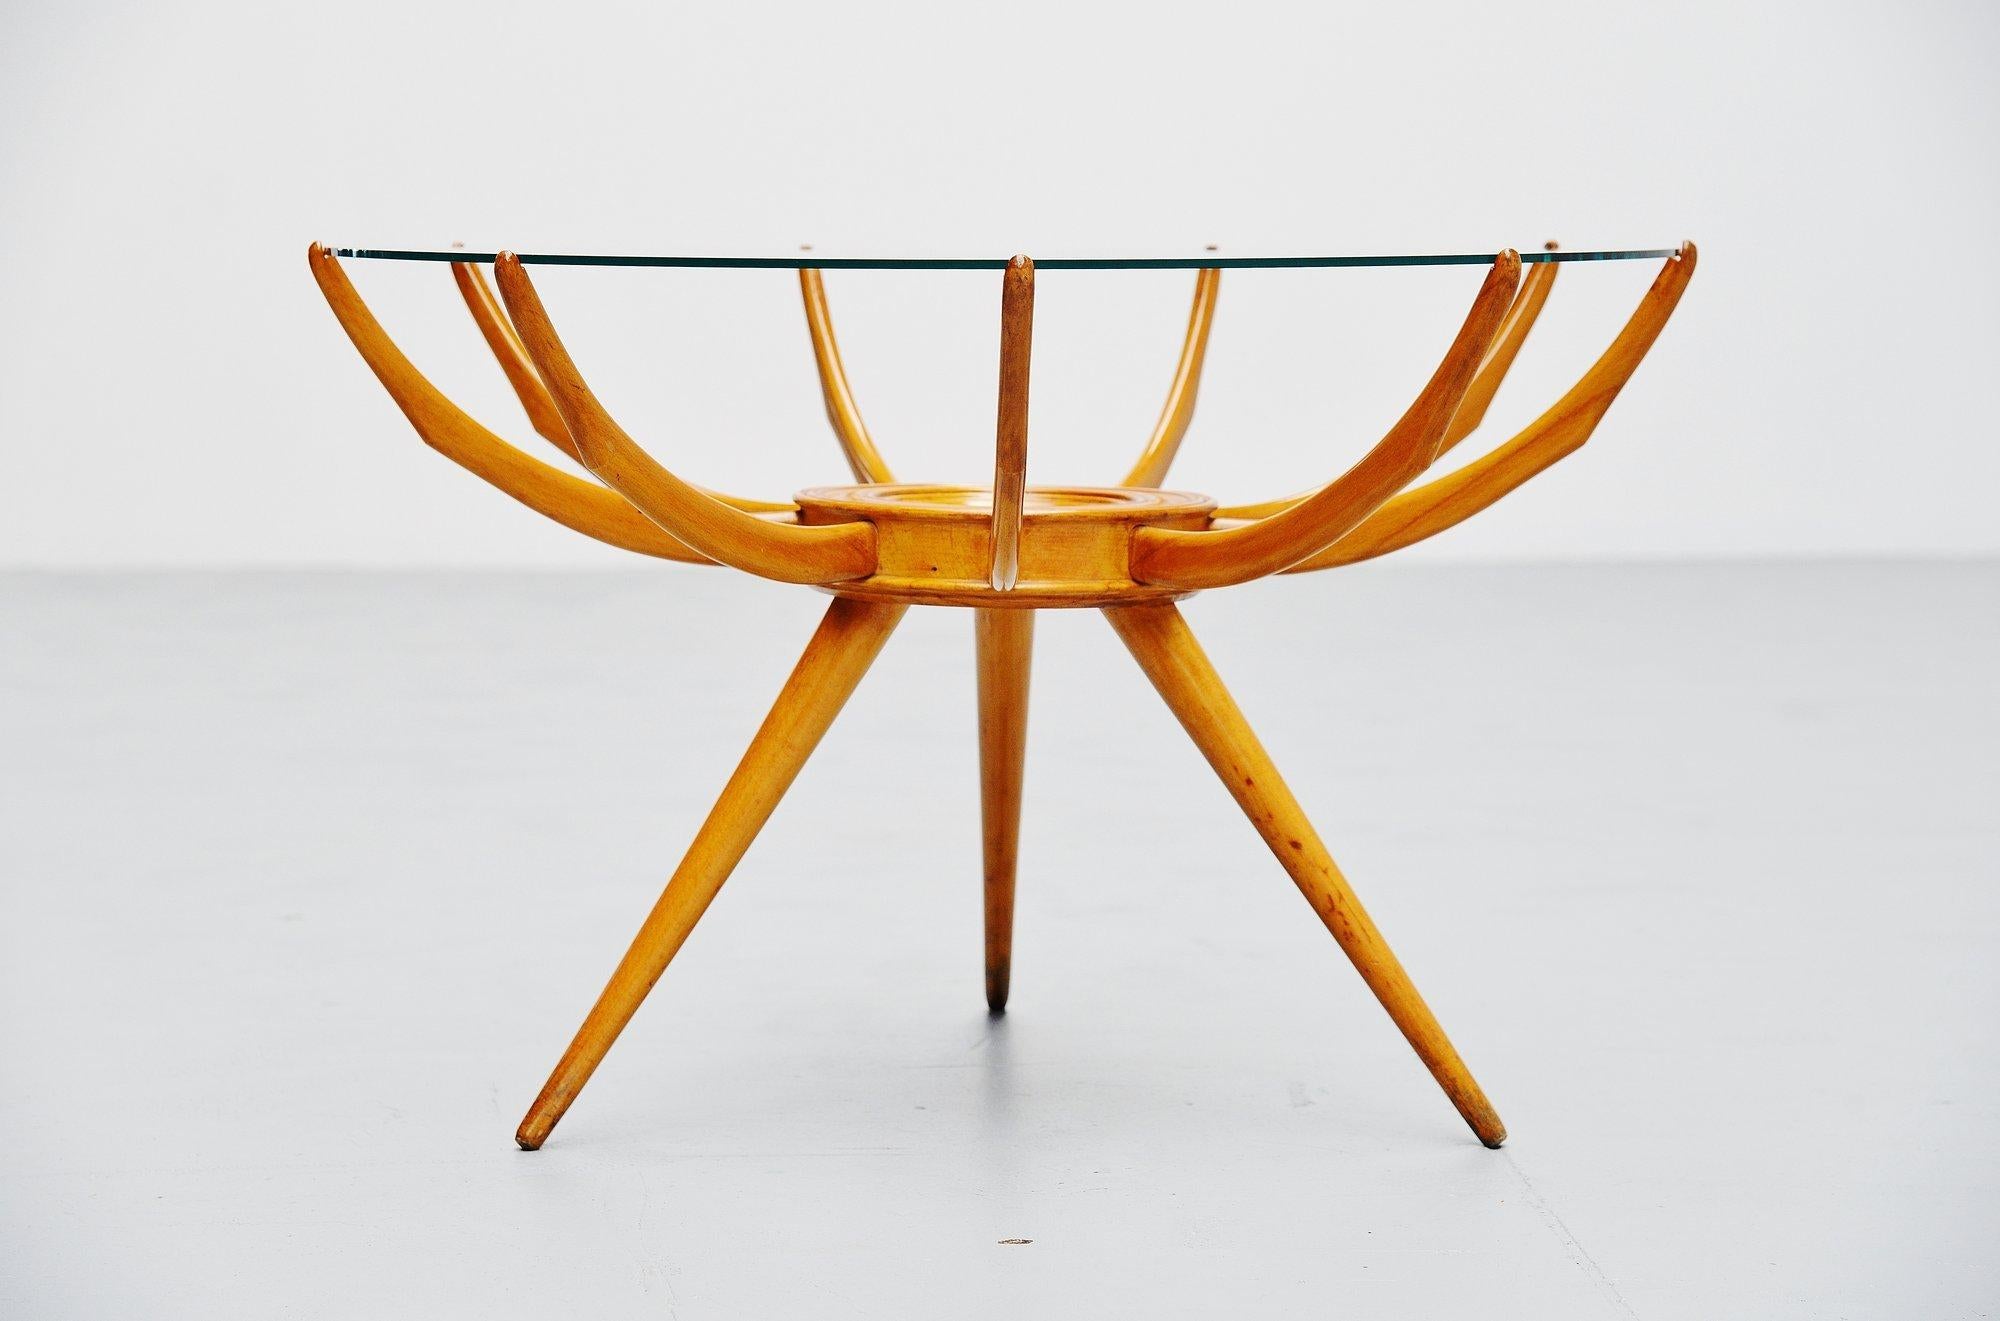 Extraordinary shaped Ragno ( = spider) side or coffee table designed by Carlo de Carli, Italy 1950. This table is made of birch wood and has a clear glass top. I don’t think we have to explain where the name Ragno comes from, the shape is very